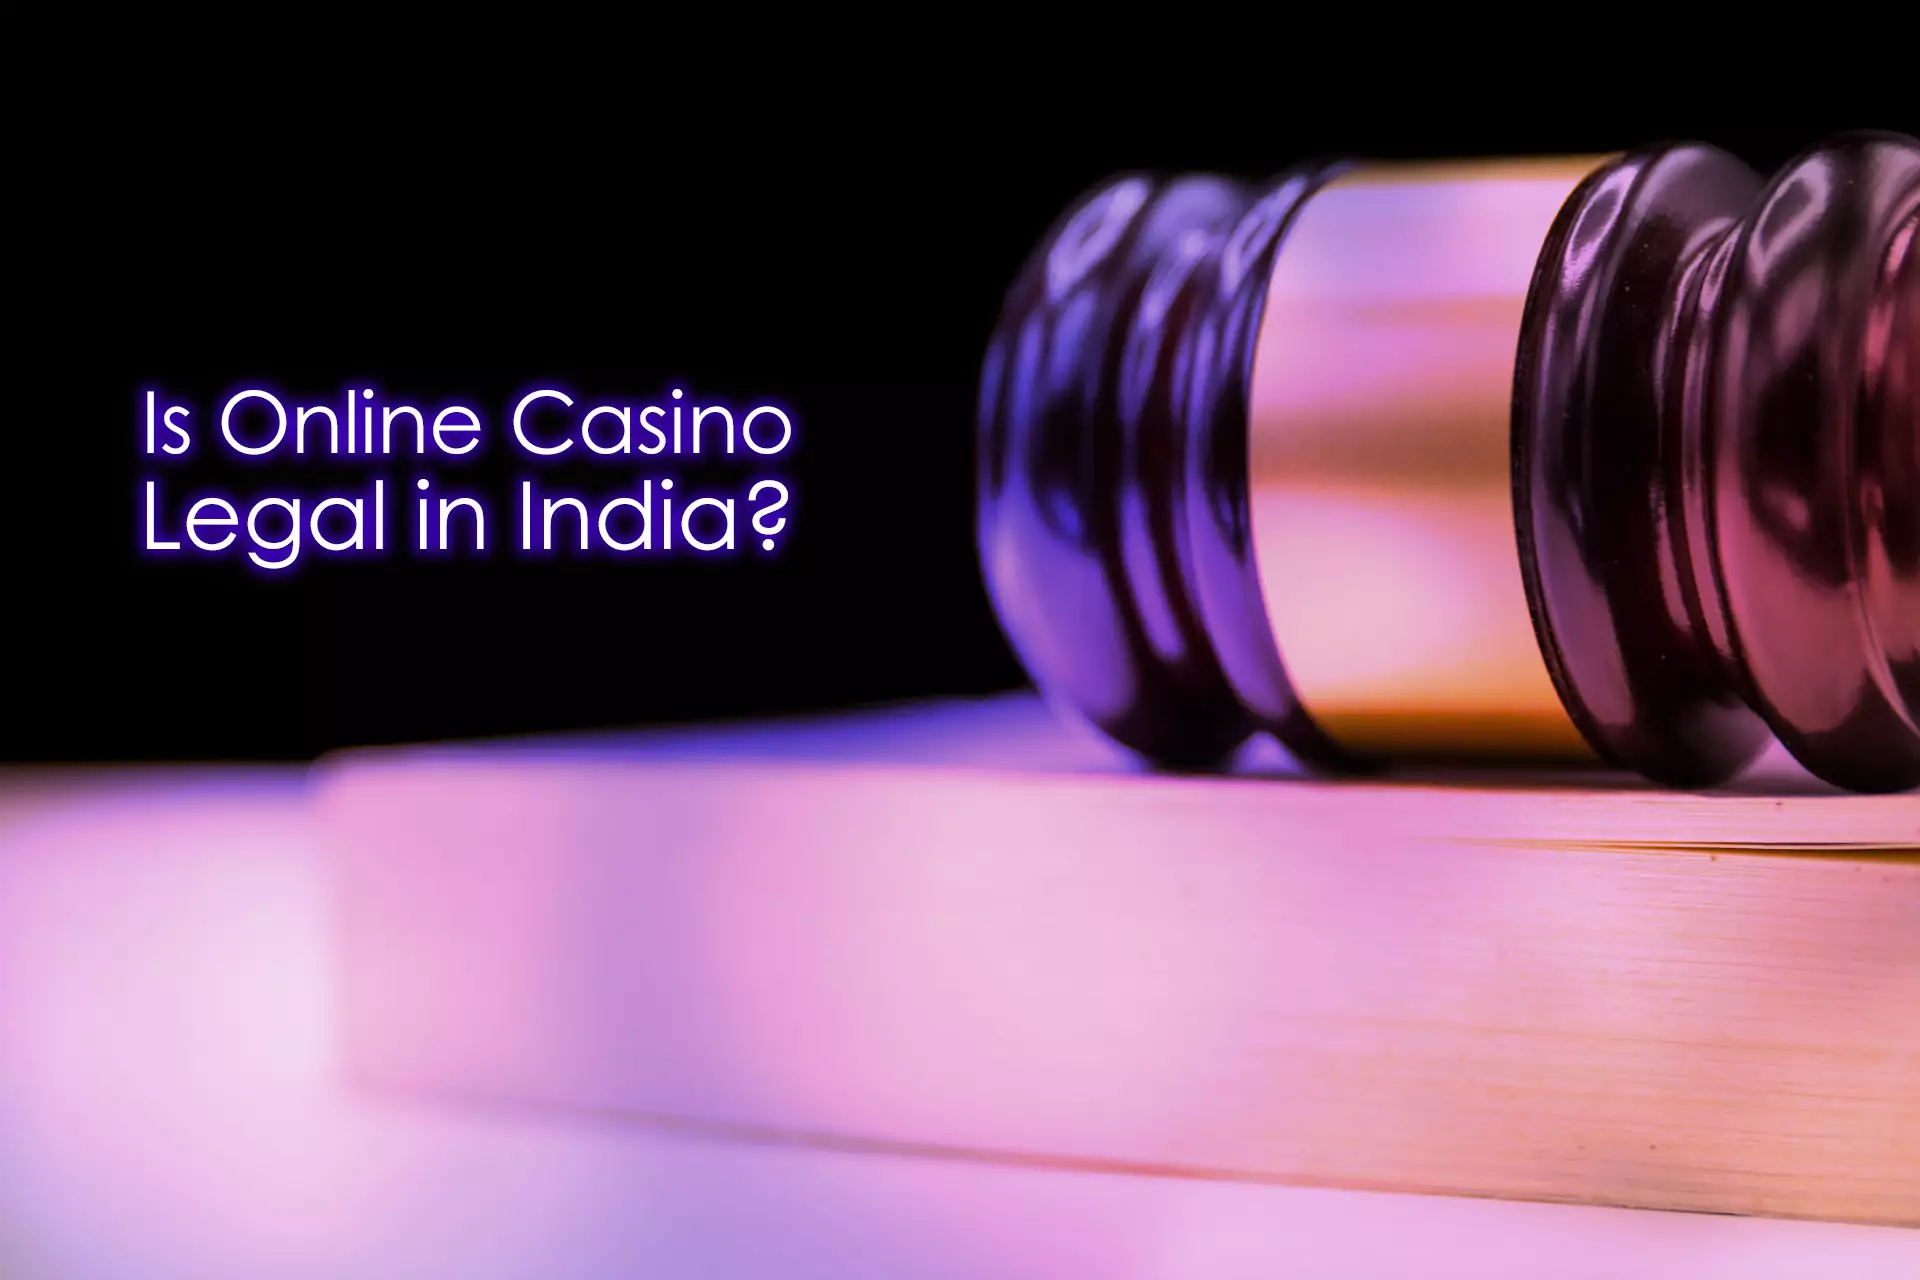 There are no laws that would prohibit online casinos in India.